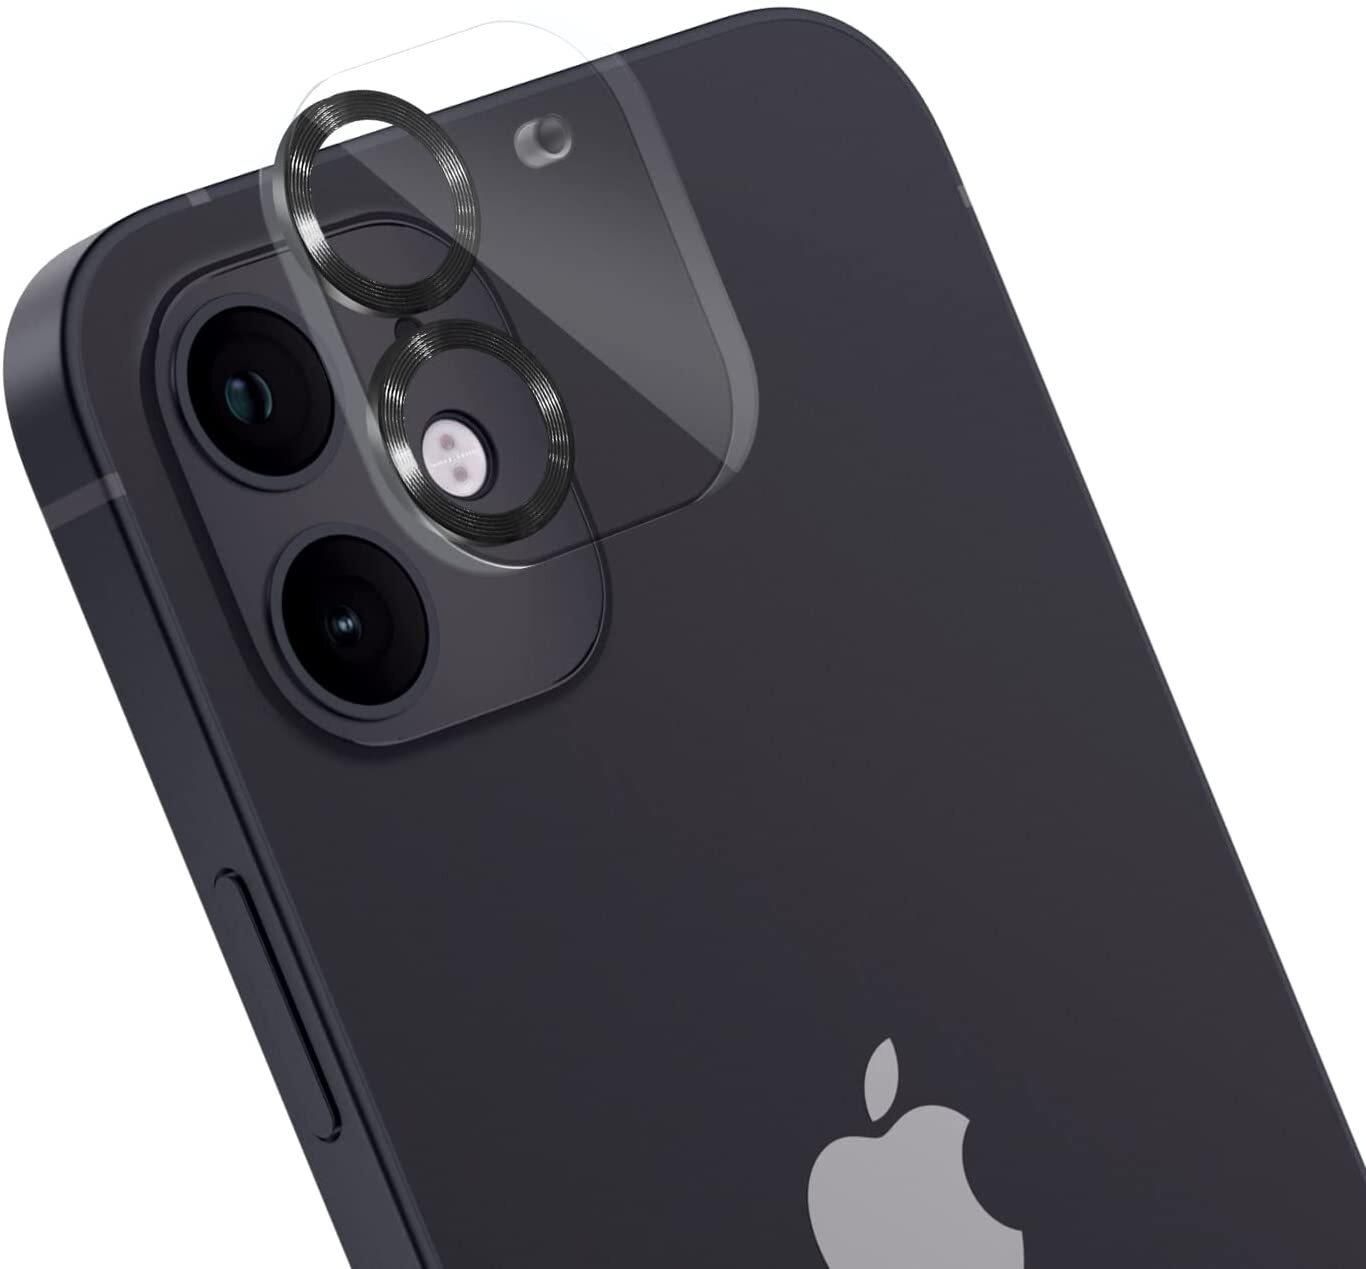 Moxedo Camera Lens Protector, 9H Tempered Glass, Scratch Resistant Aluminum Alloy Frame Camera Cover Screen Protector Compatible for iPhone 11/12 Mini 5.4 inch (EERIE BLACK)